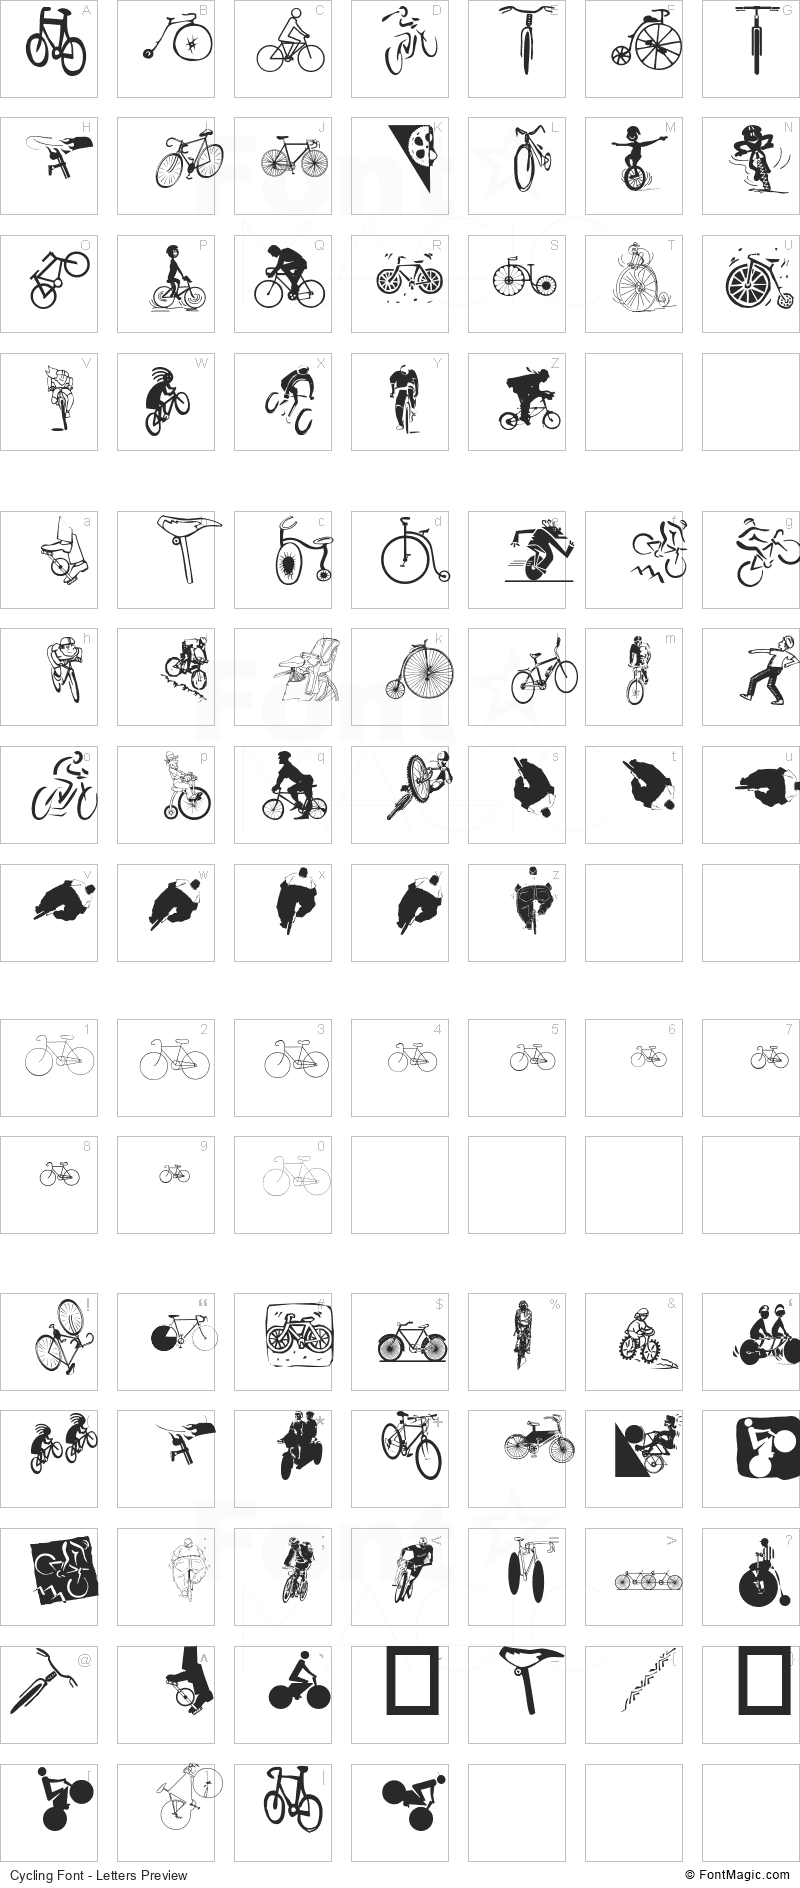 Cycling Font - All Latters Preview Chart